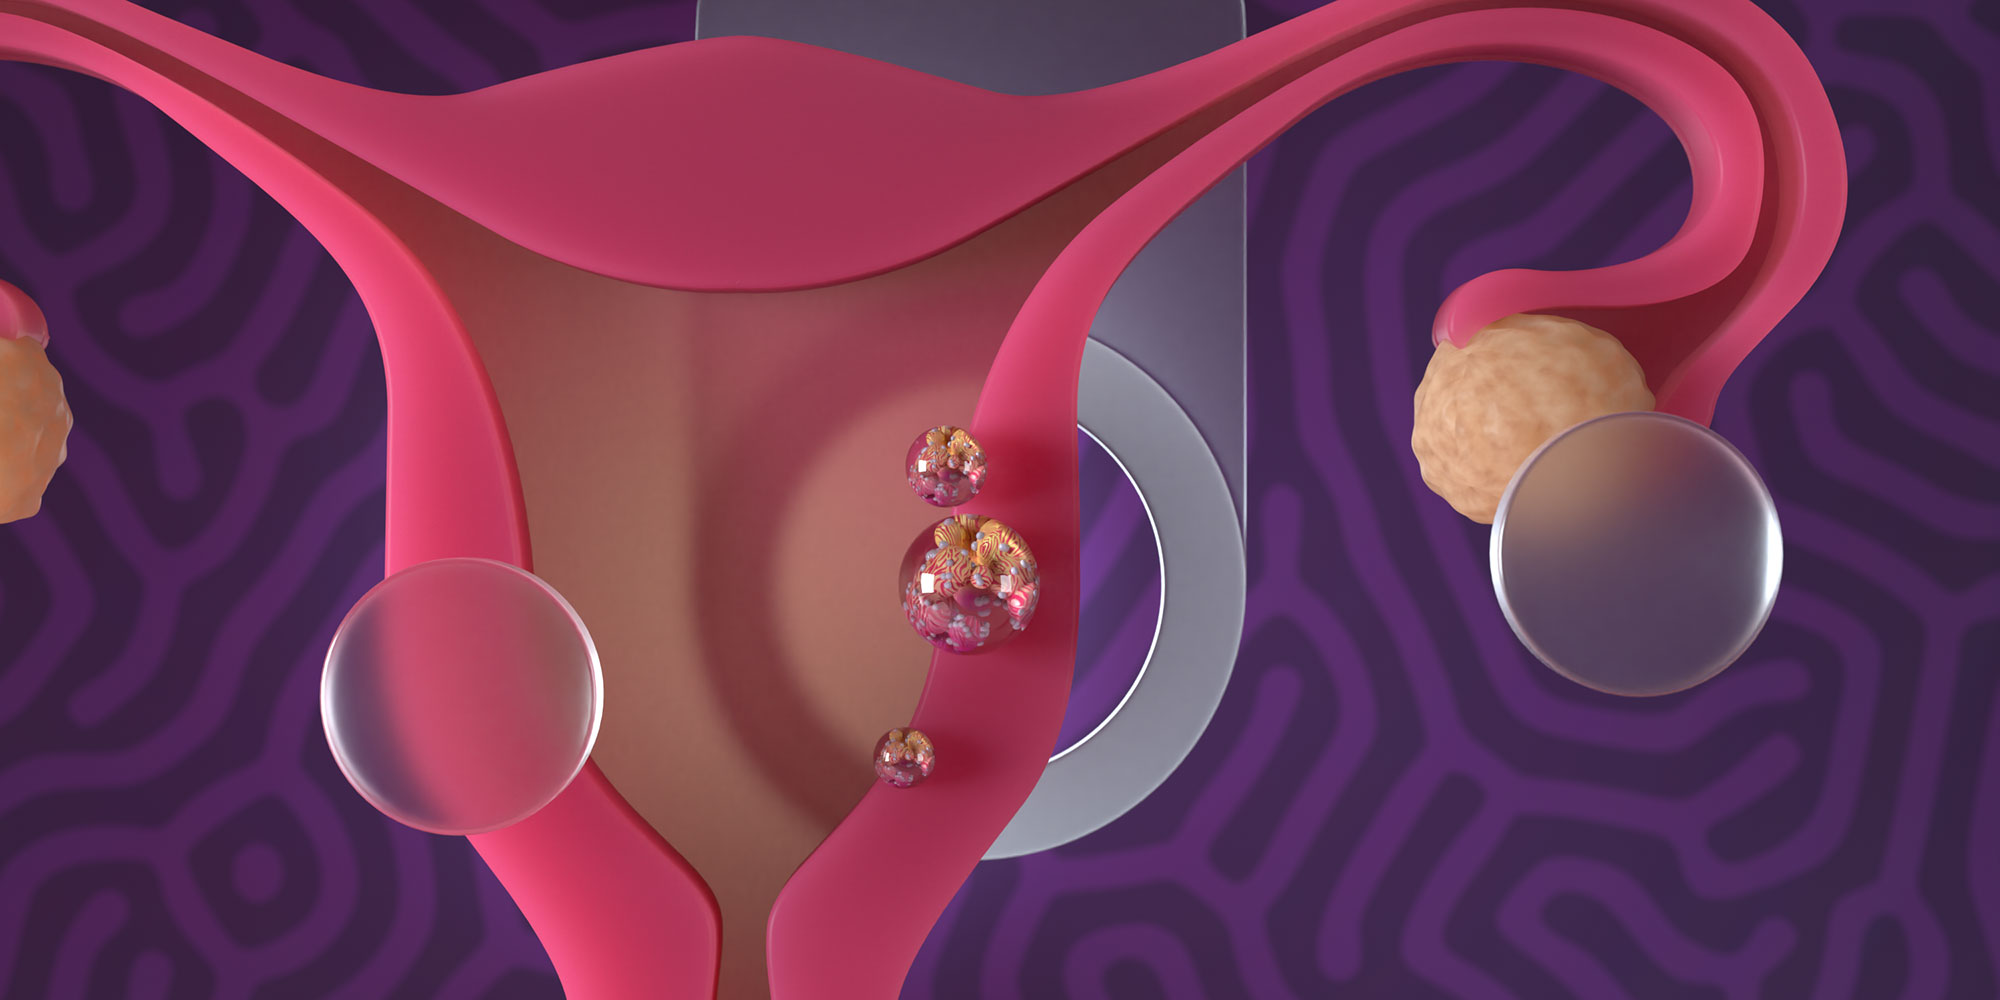 Endometrial cancer – early detection and referral 